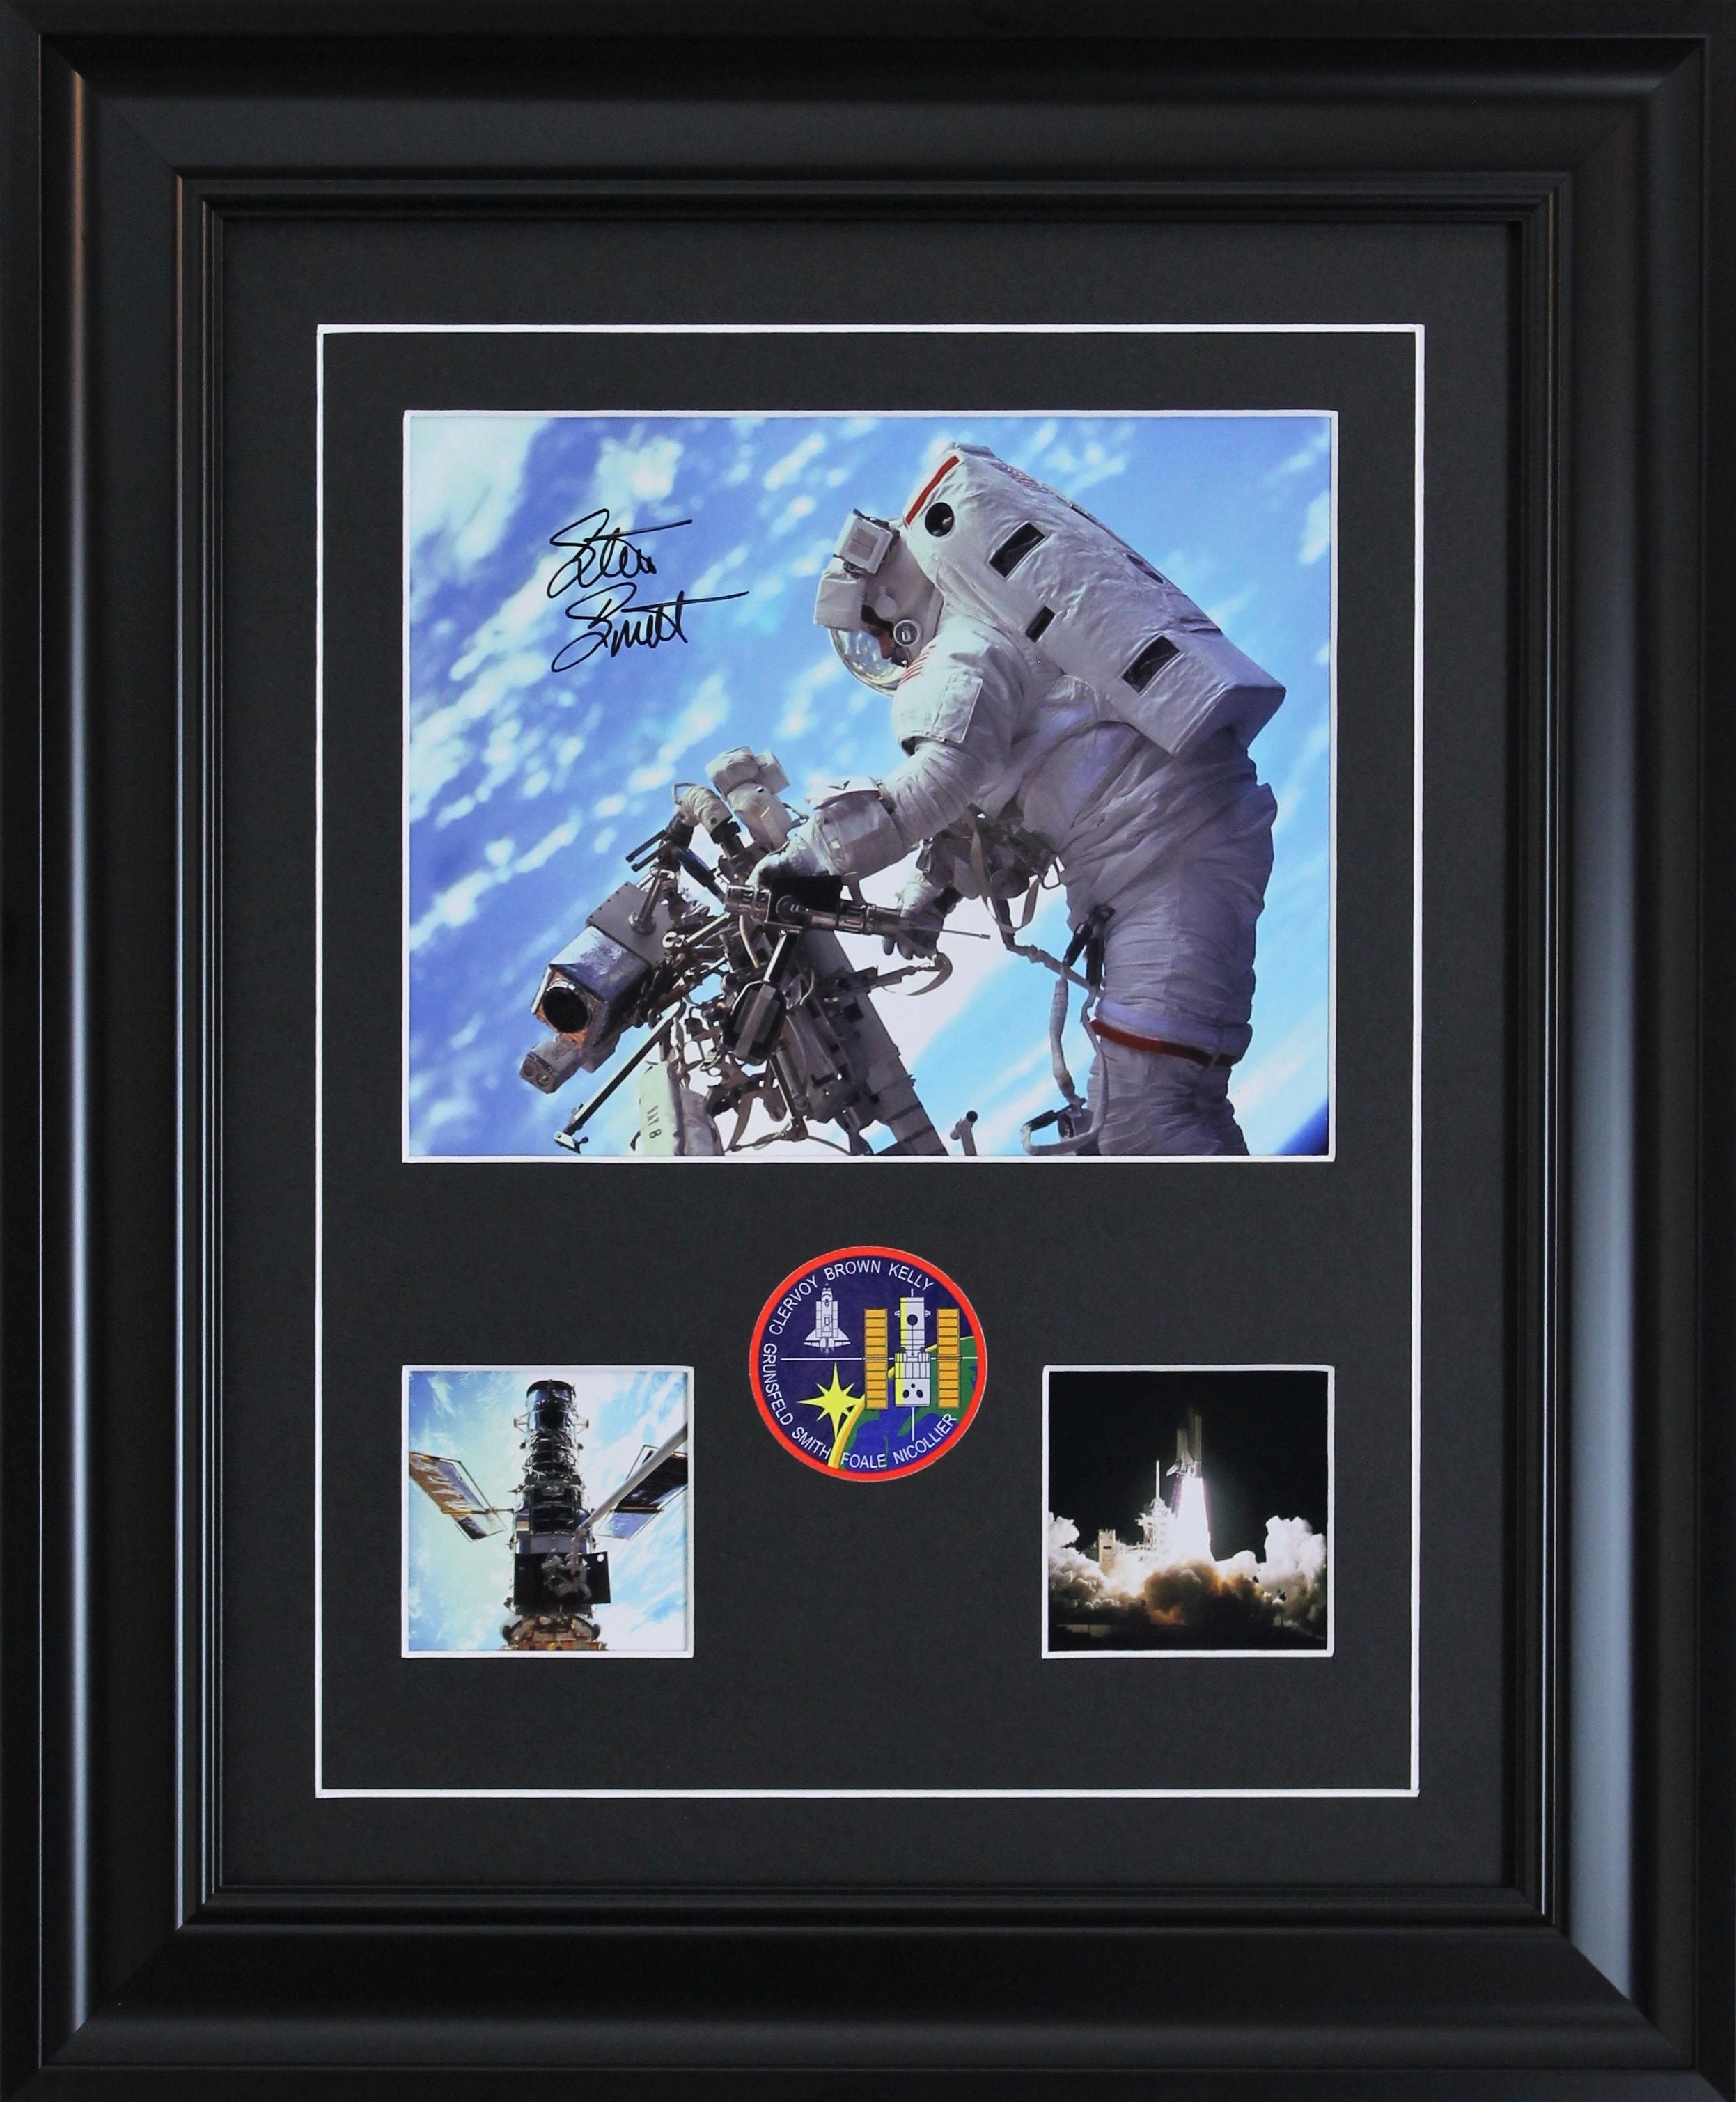 STS-103 photographic print signed by Mission Specialist Steve Smith - The Space Store